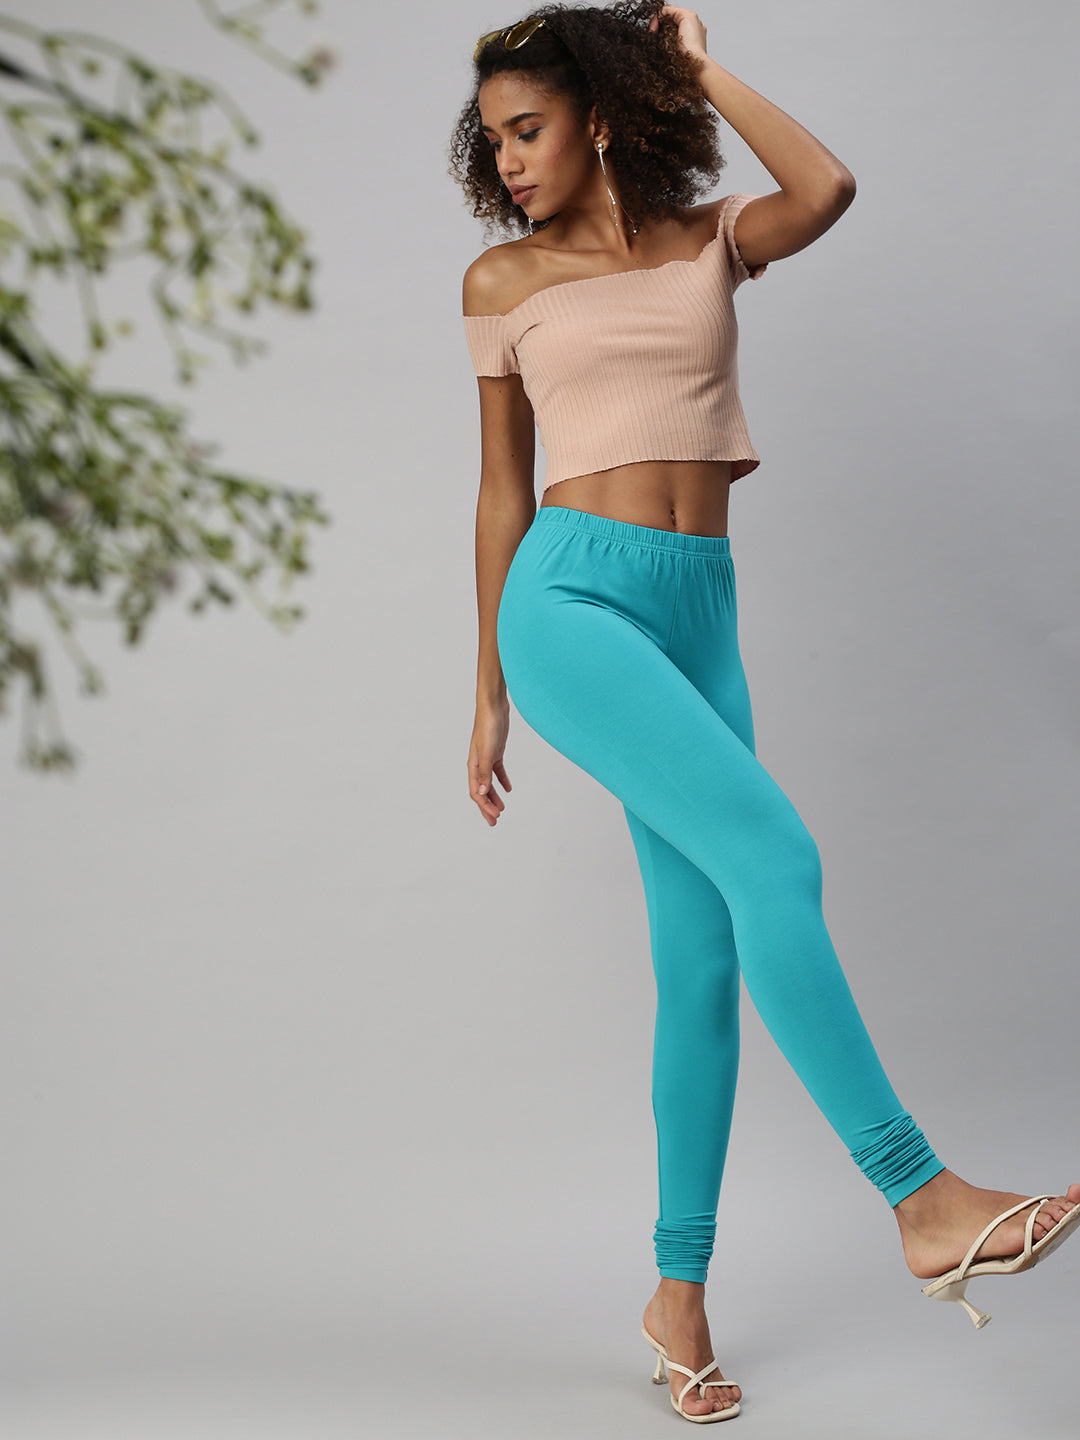 Turquoise Blue Solid Ankle Length Legging - VALLES365 by S.C. - 4144986